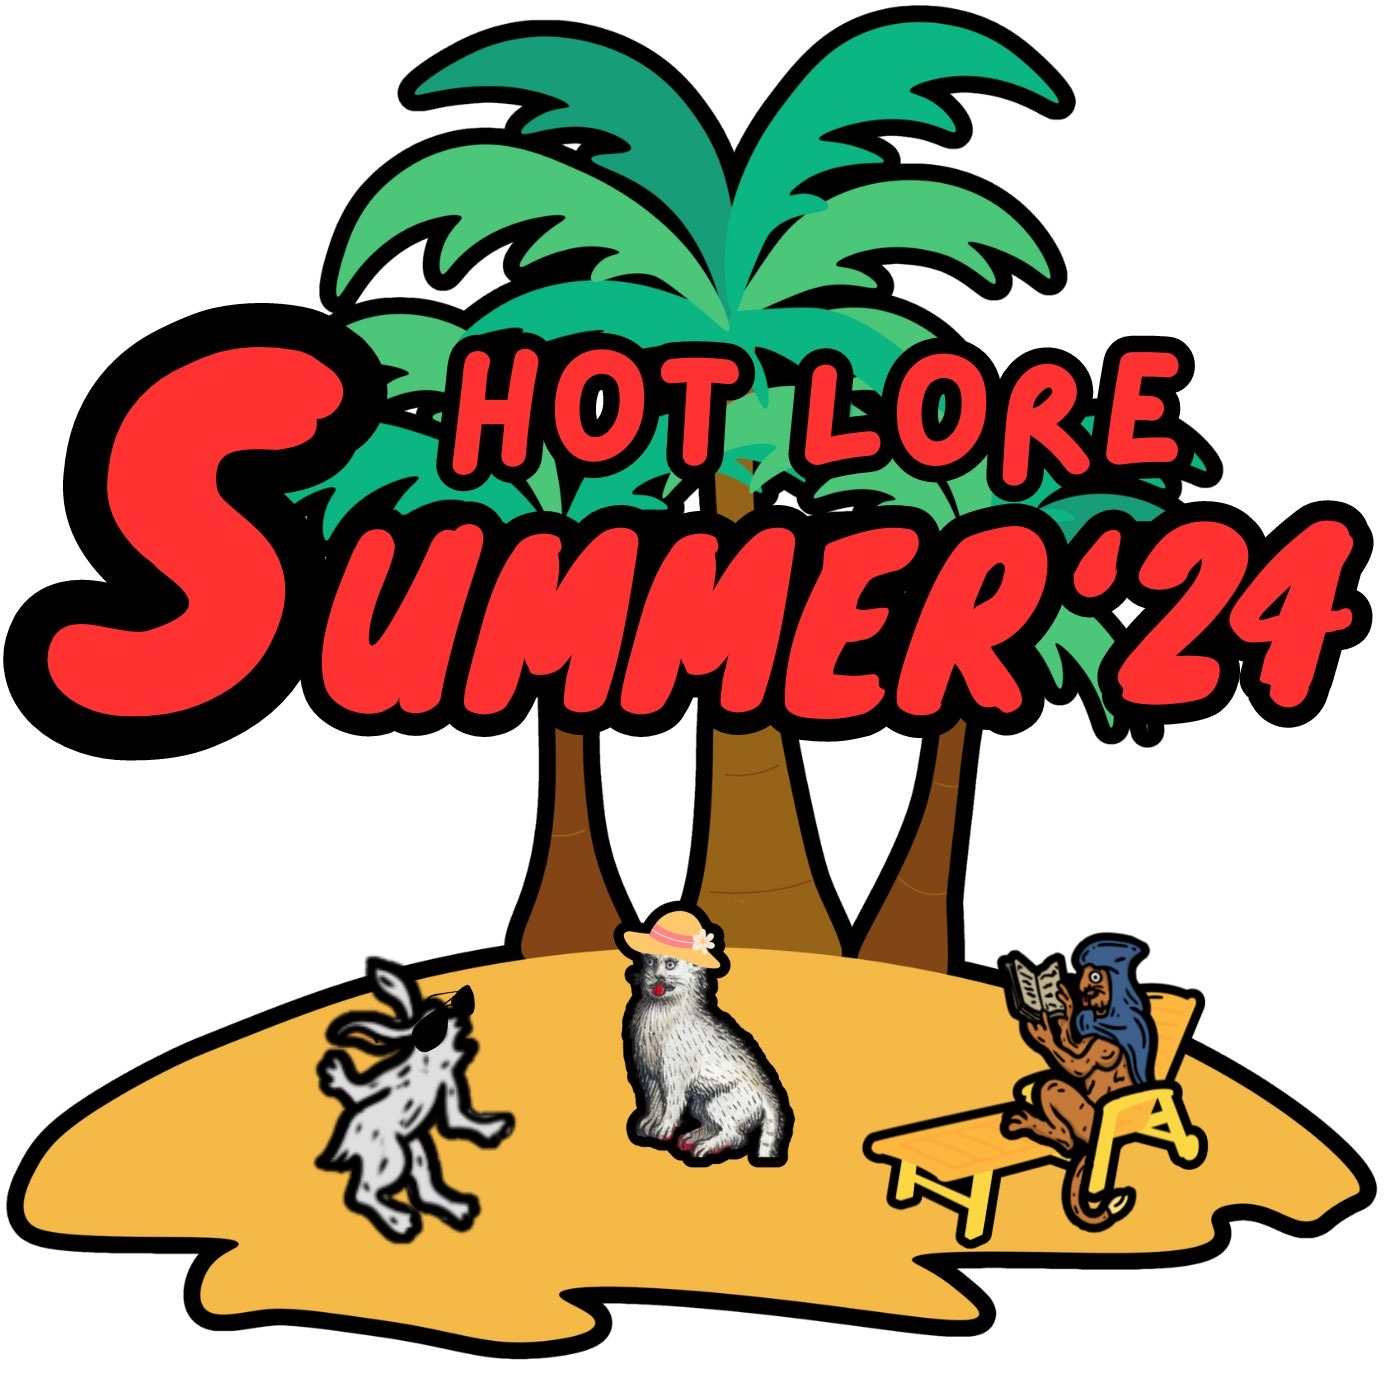 Hot Lore Summer is in session!